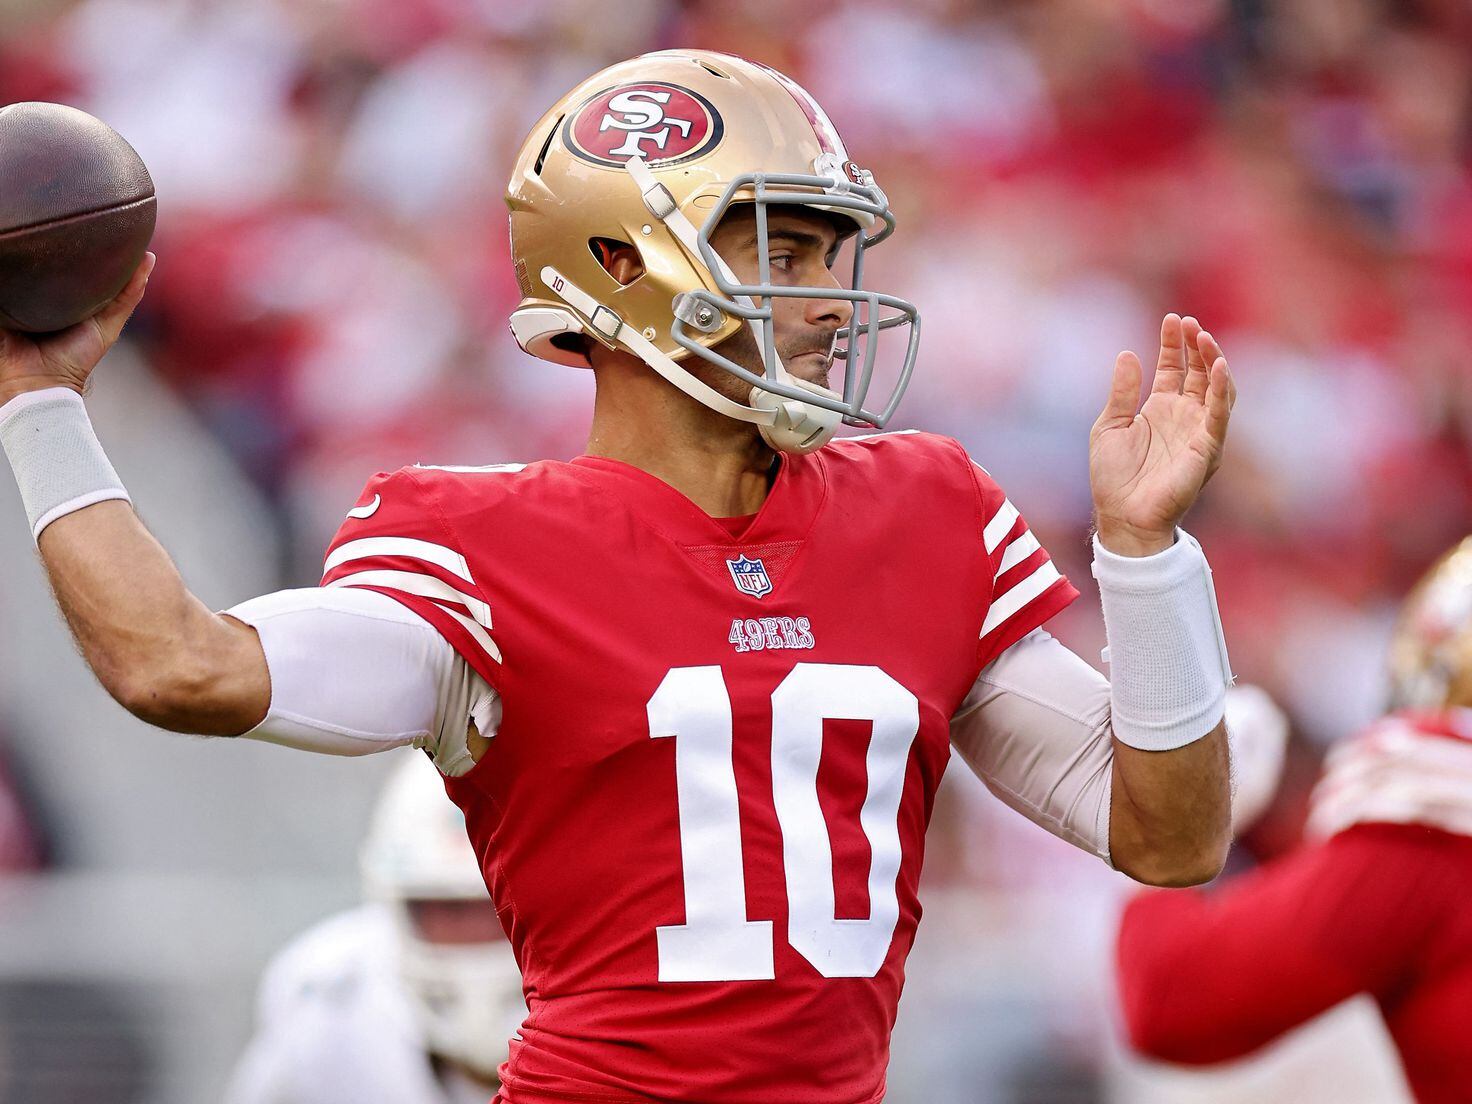 49ers QB Jimmy Garoppolo out for season with broken foot - ESPN